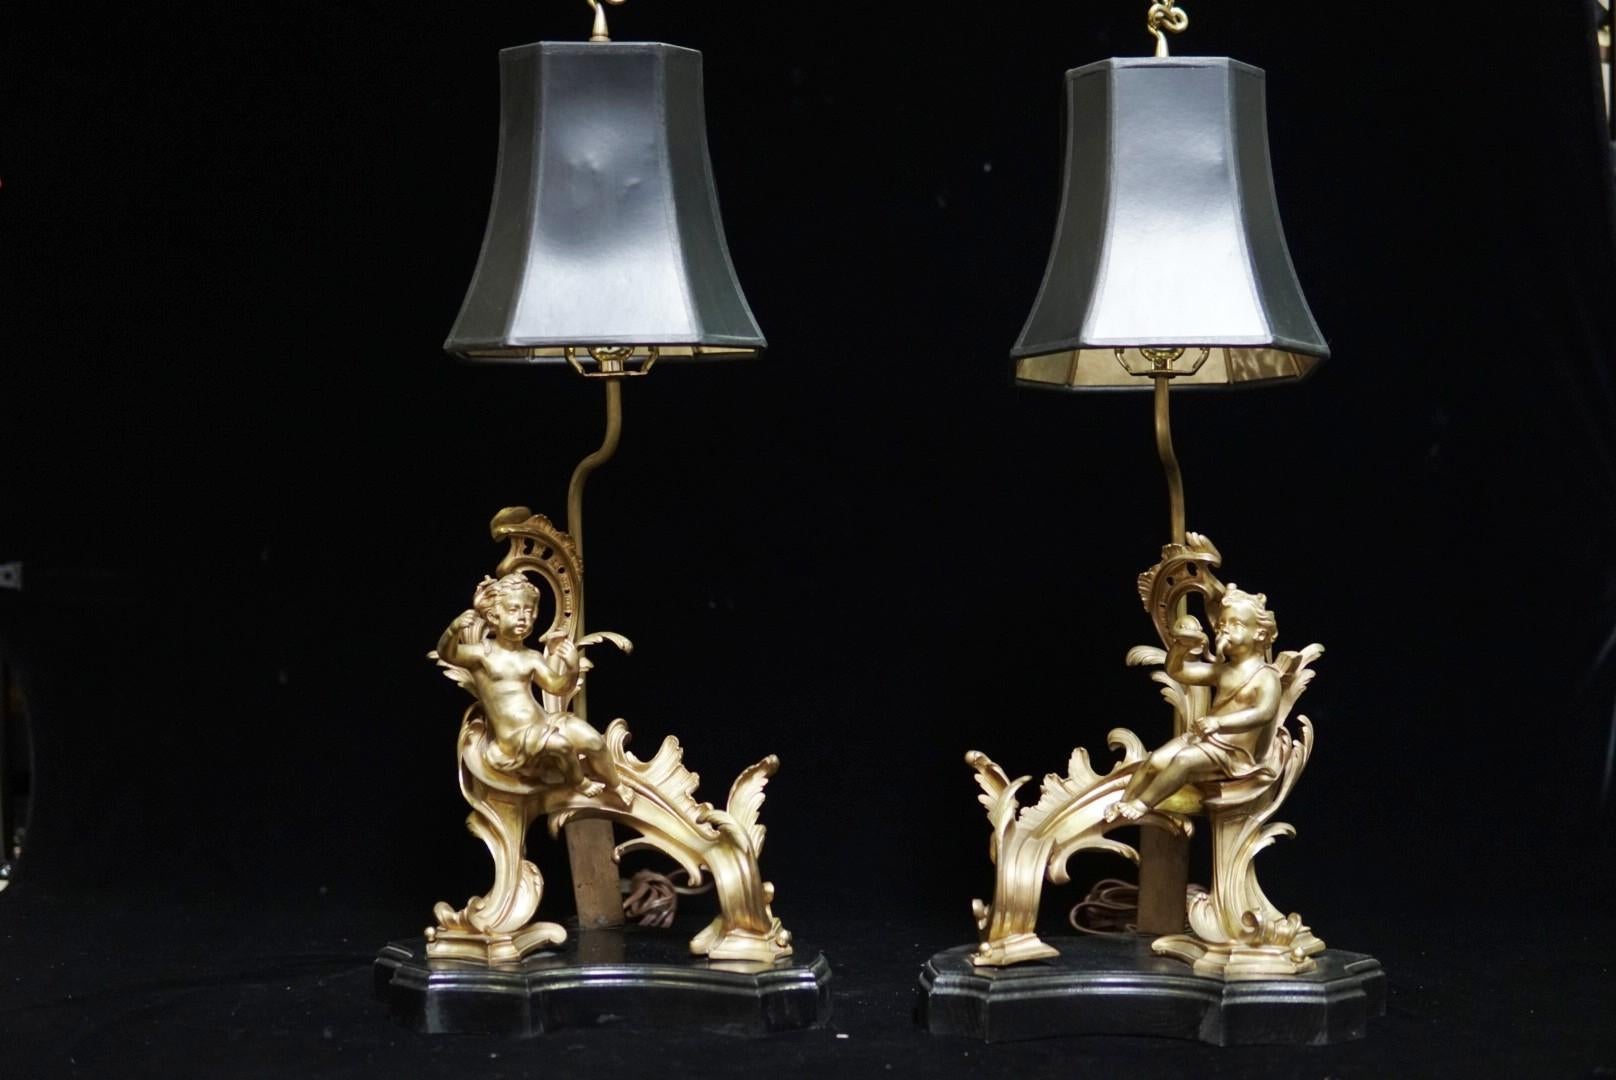 Gilt Pair of French Ormolu Chenet Mounted Lamps, 19th Century